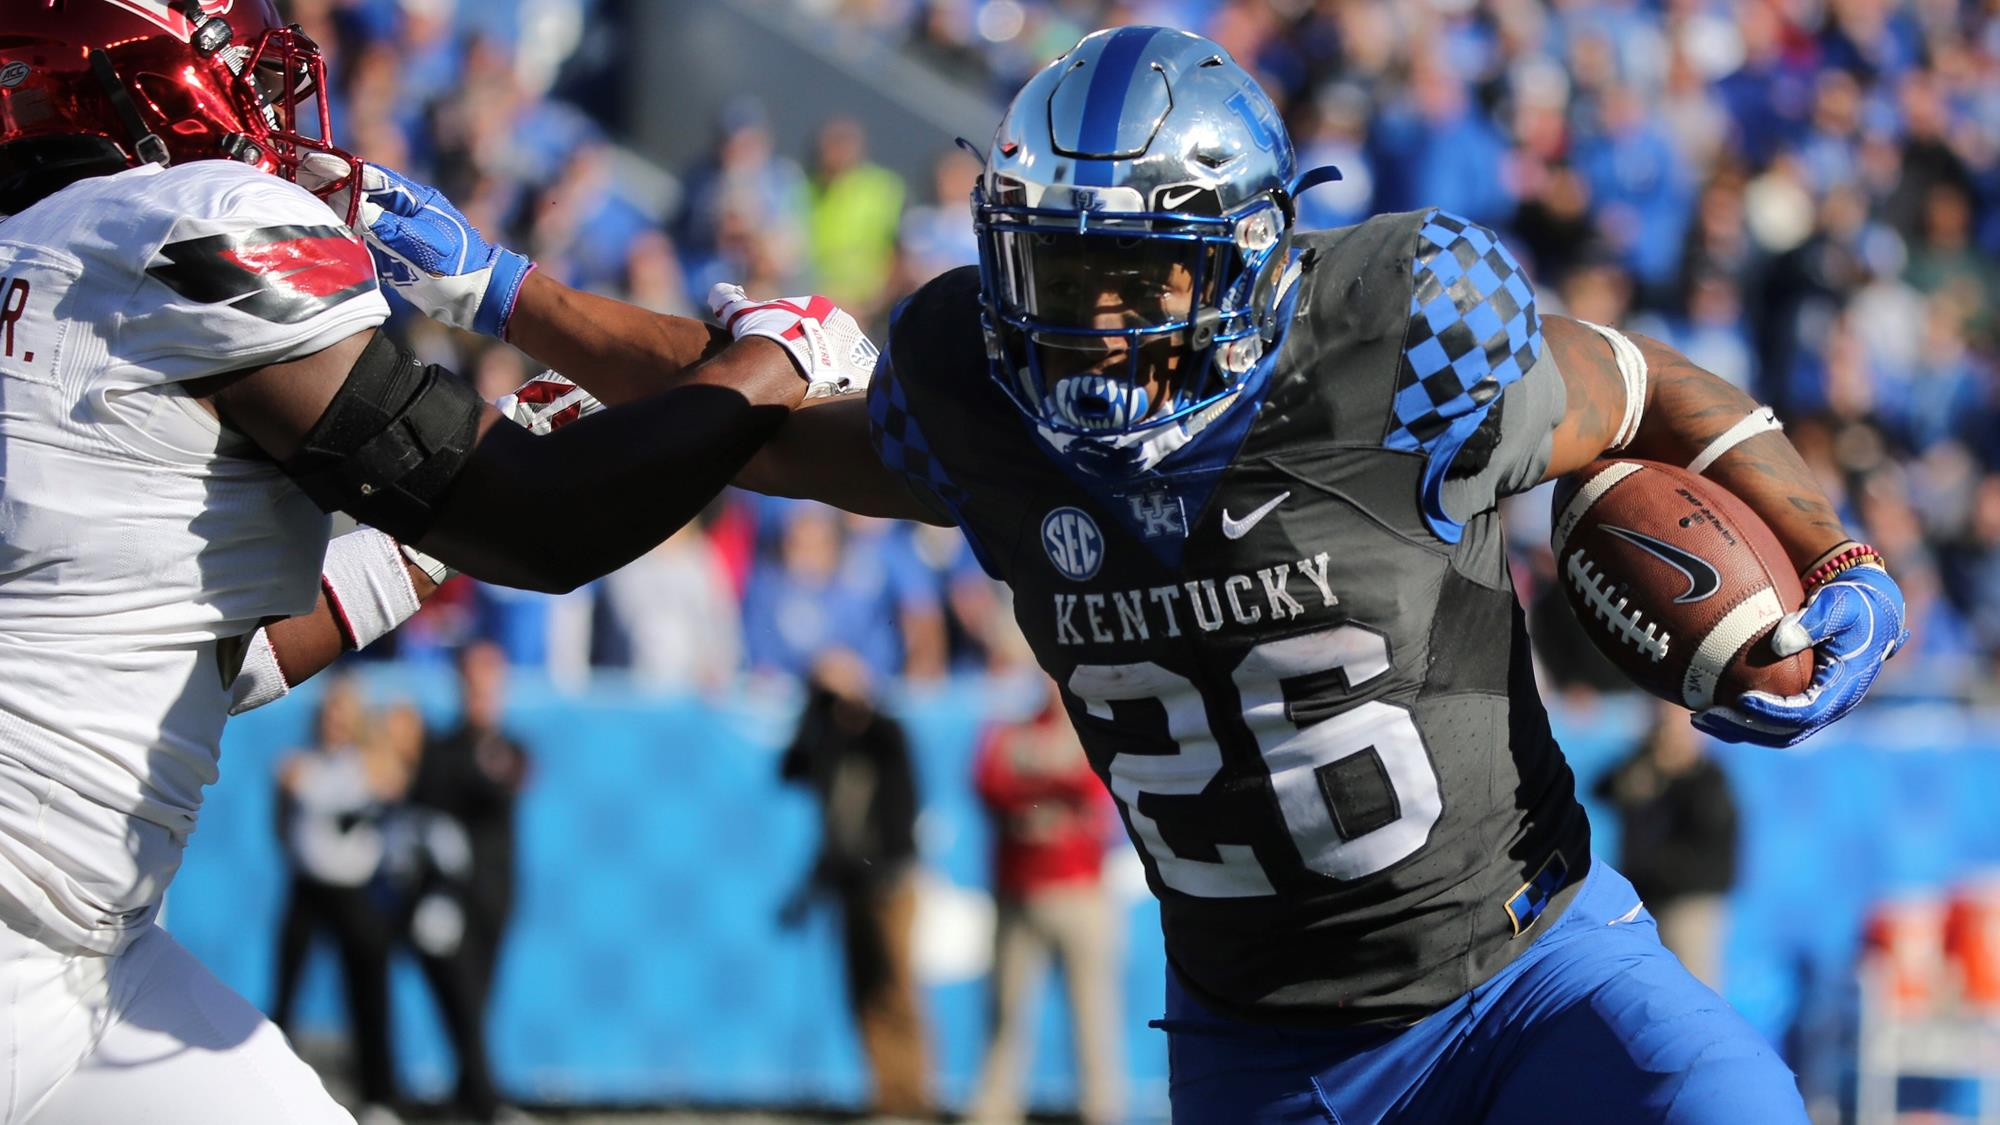 FB: Behind the Facemask - Benny Snell Jr.